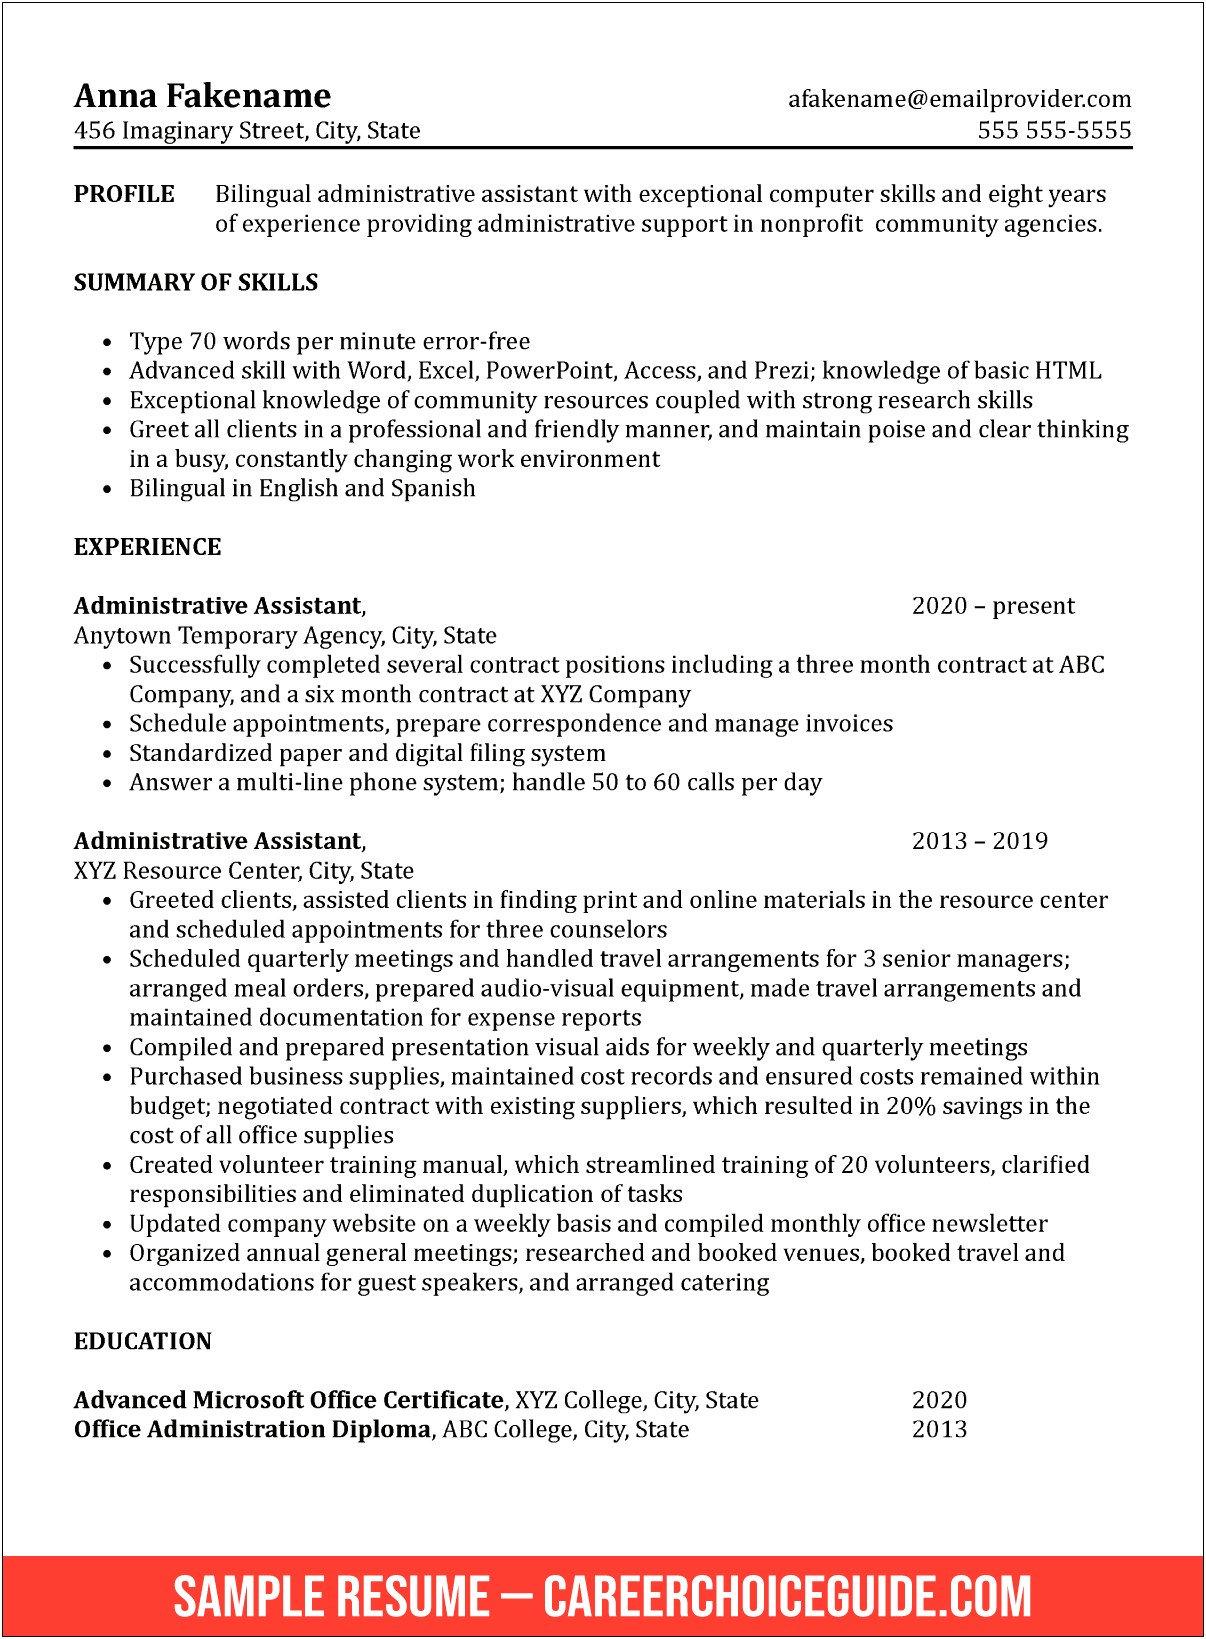 Sample Resume For Administrative Assistant In School